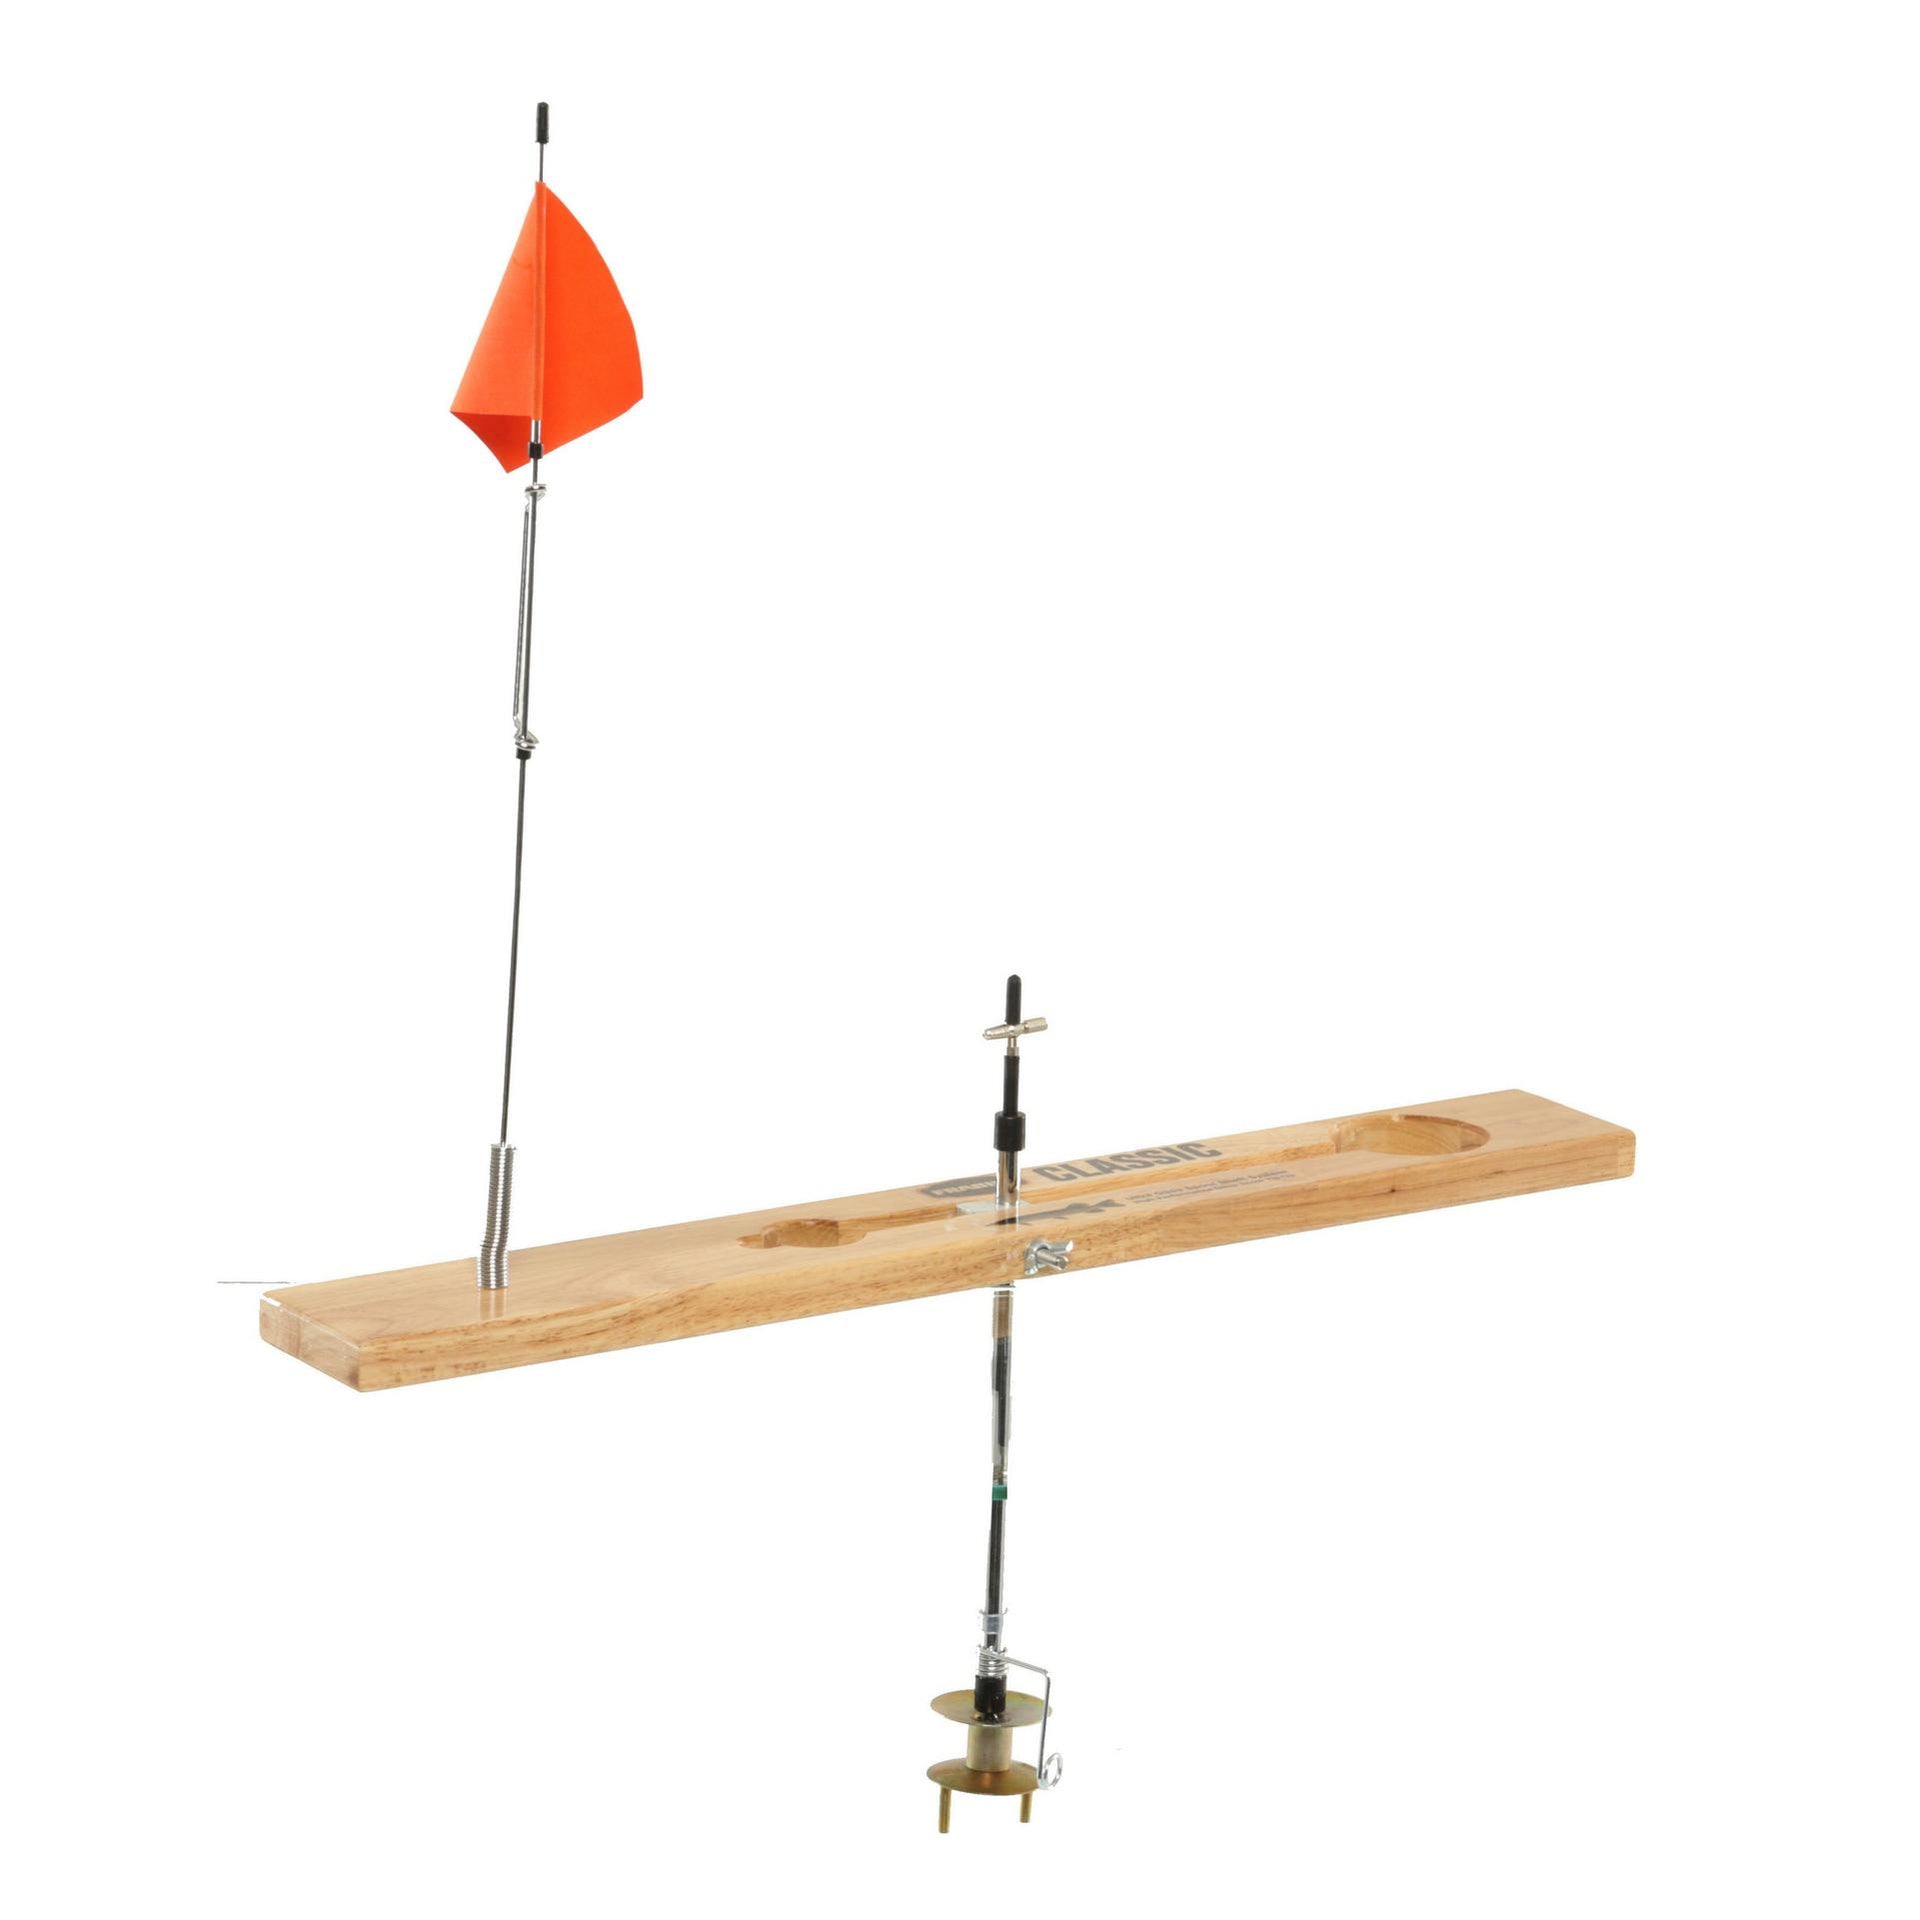 Ice fishing tip-up with indicator light and flag 1991 patent black